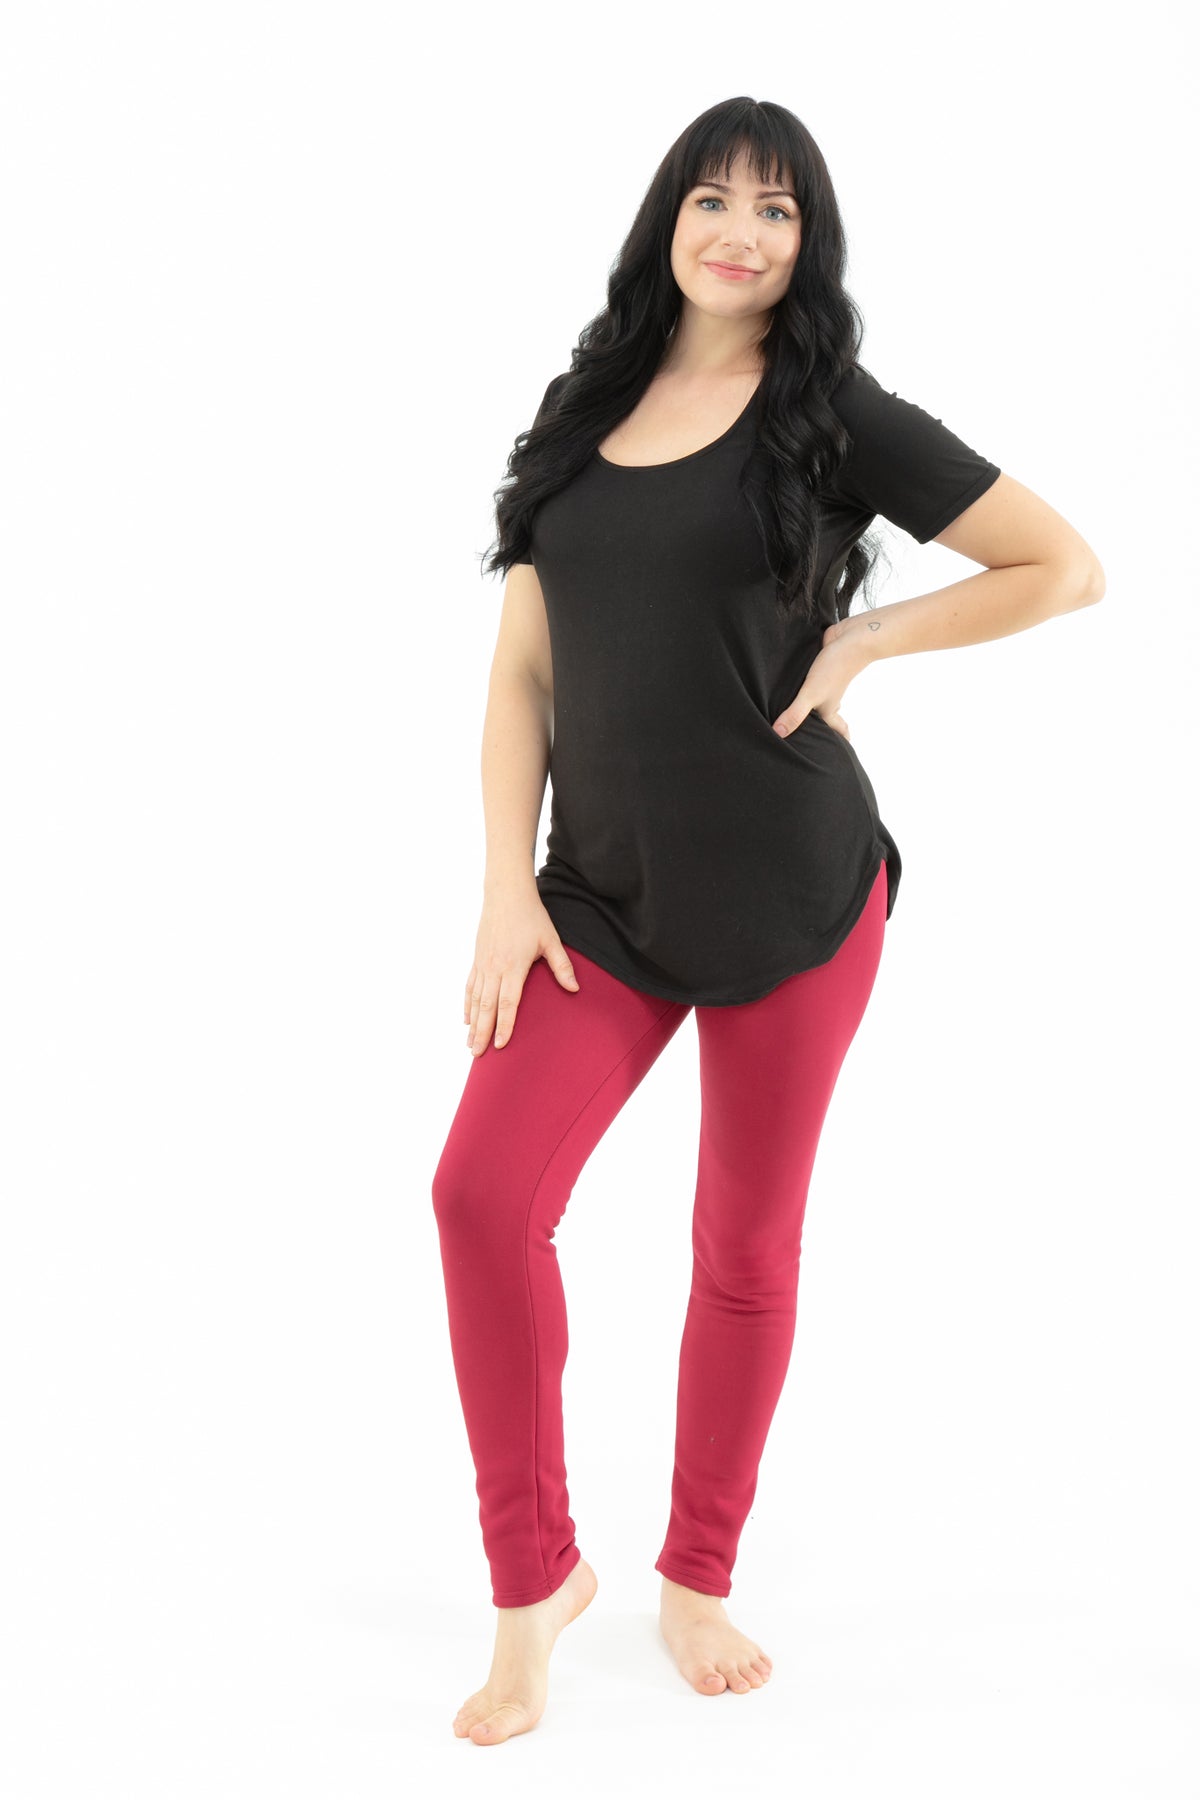 Cozy Fleece Lined Velvet Petite Black Leggings For Women Warm Winter Pants  With Thick Tights And Plus Size Options S 5XL From Luote, $8.87